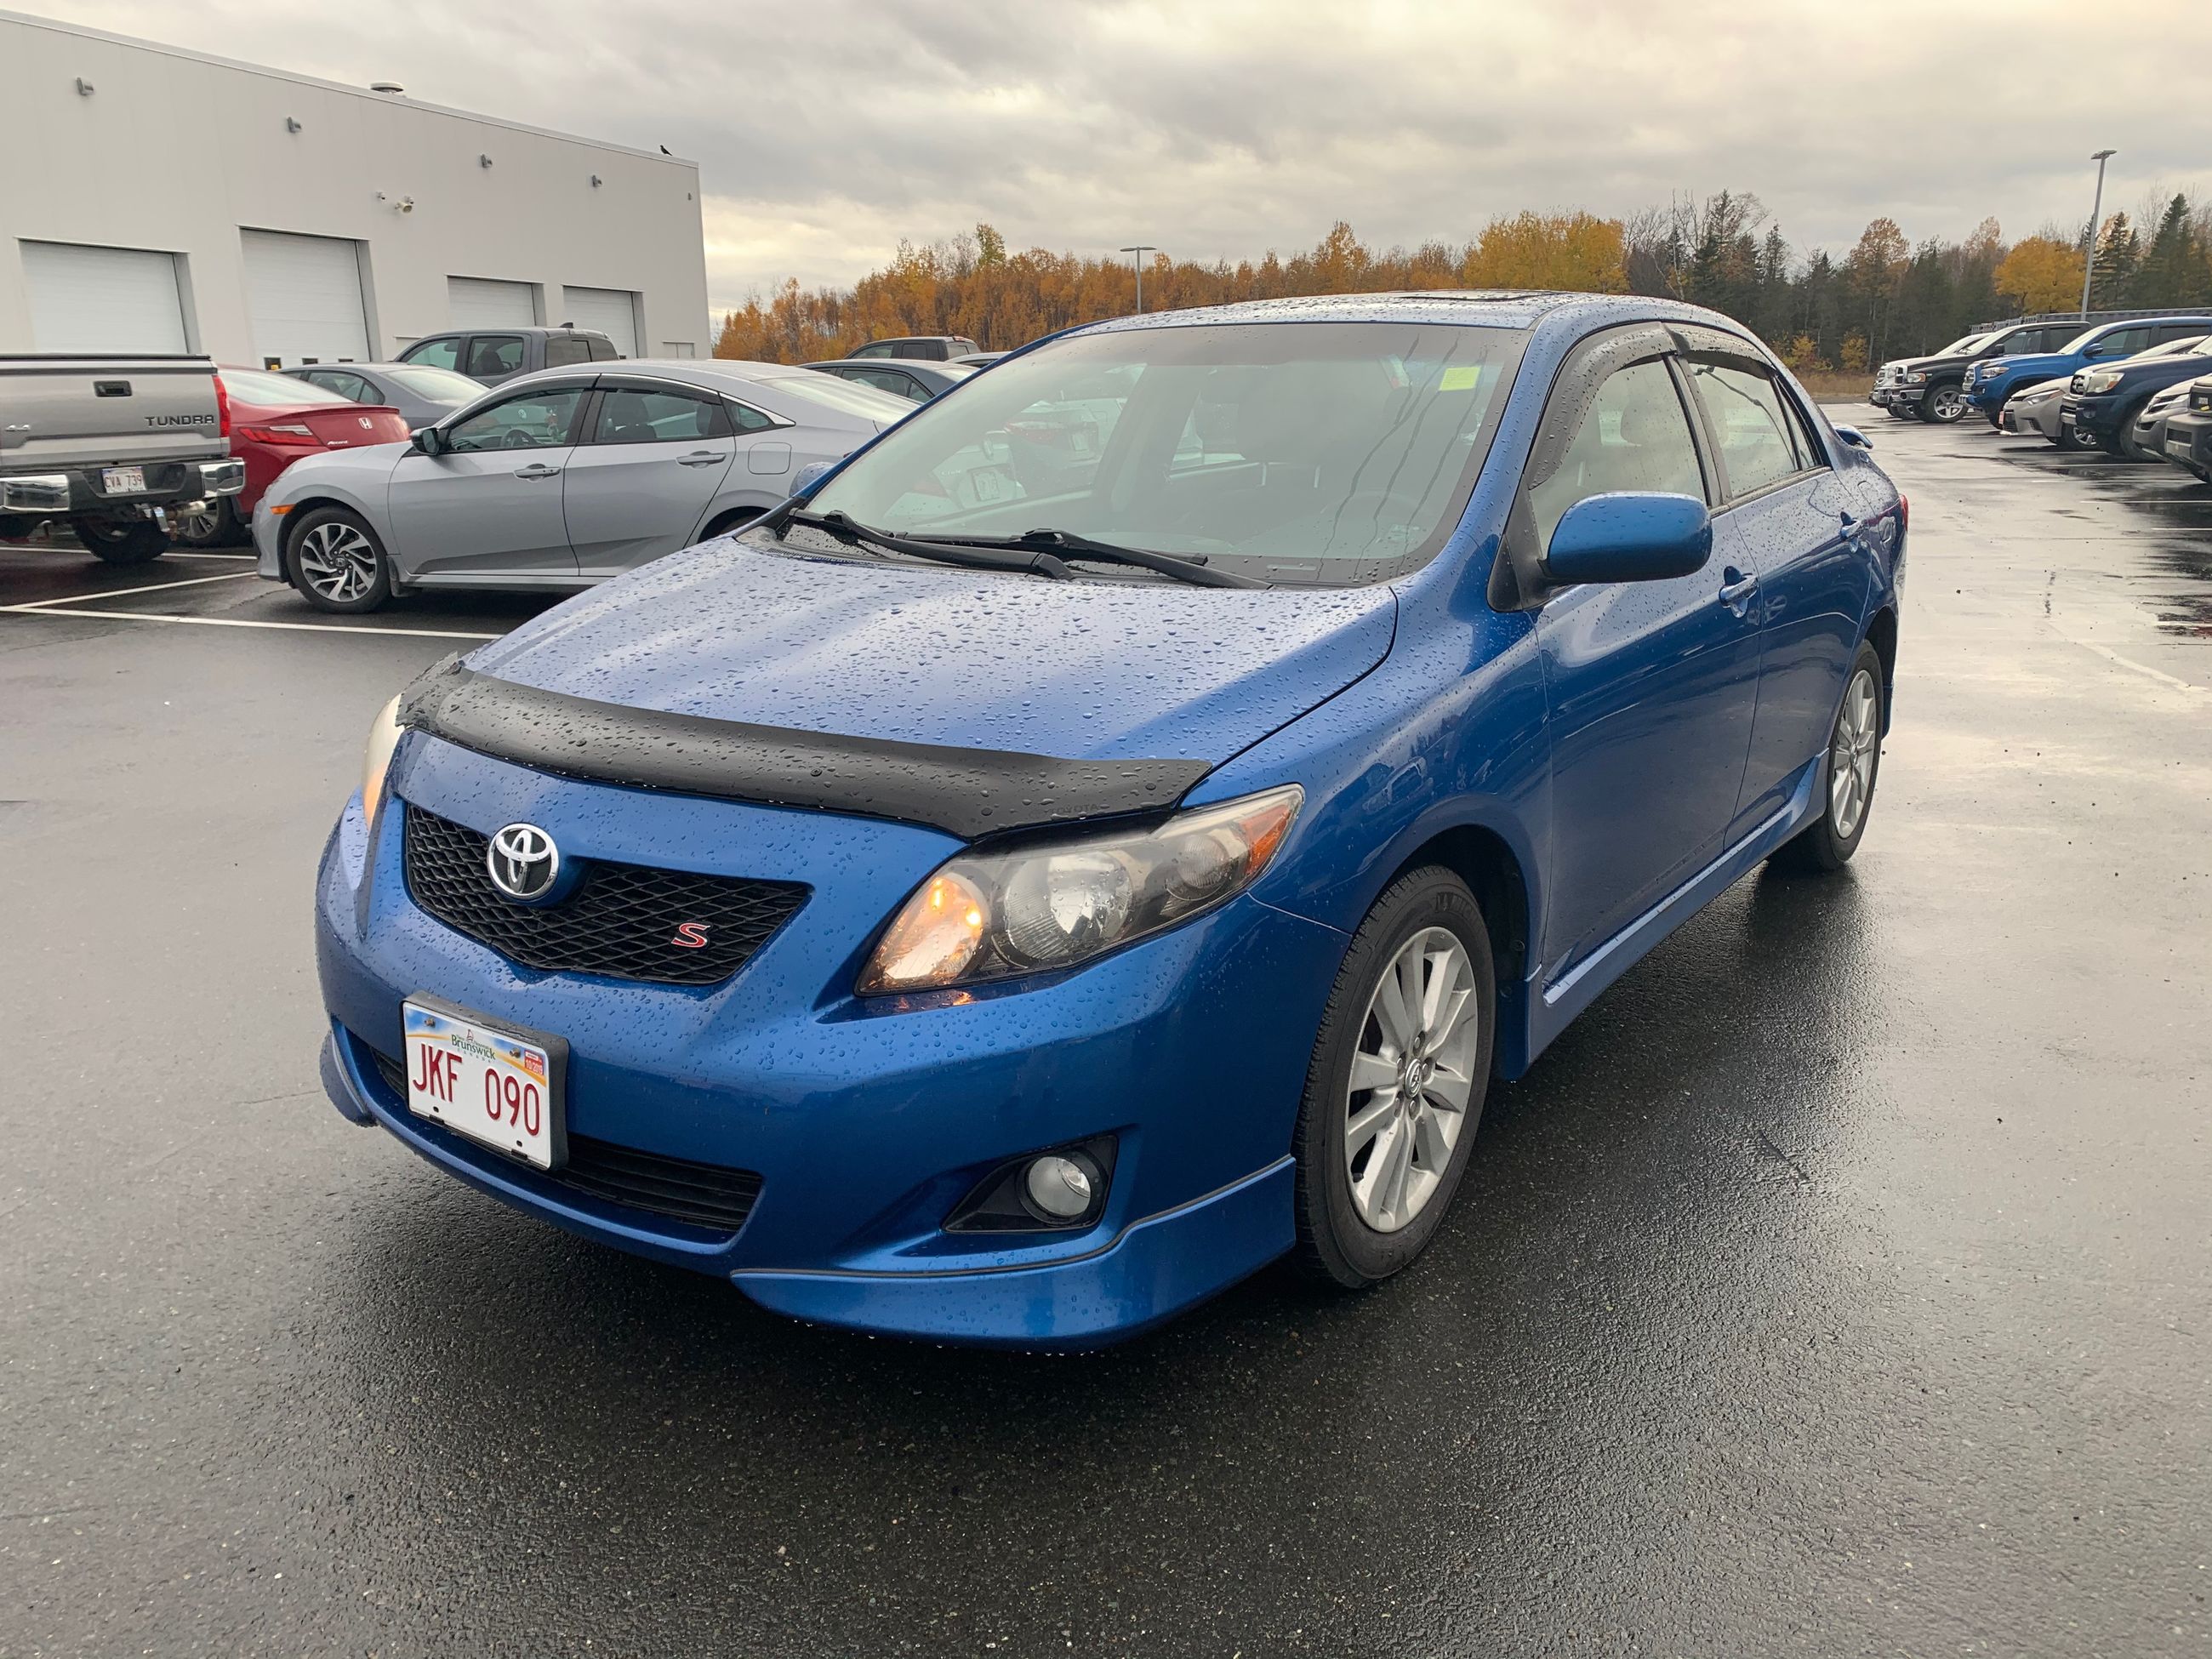 Used 2009 Toyota Corolla S in Bathurst Used inventory